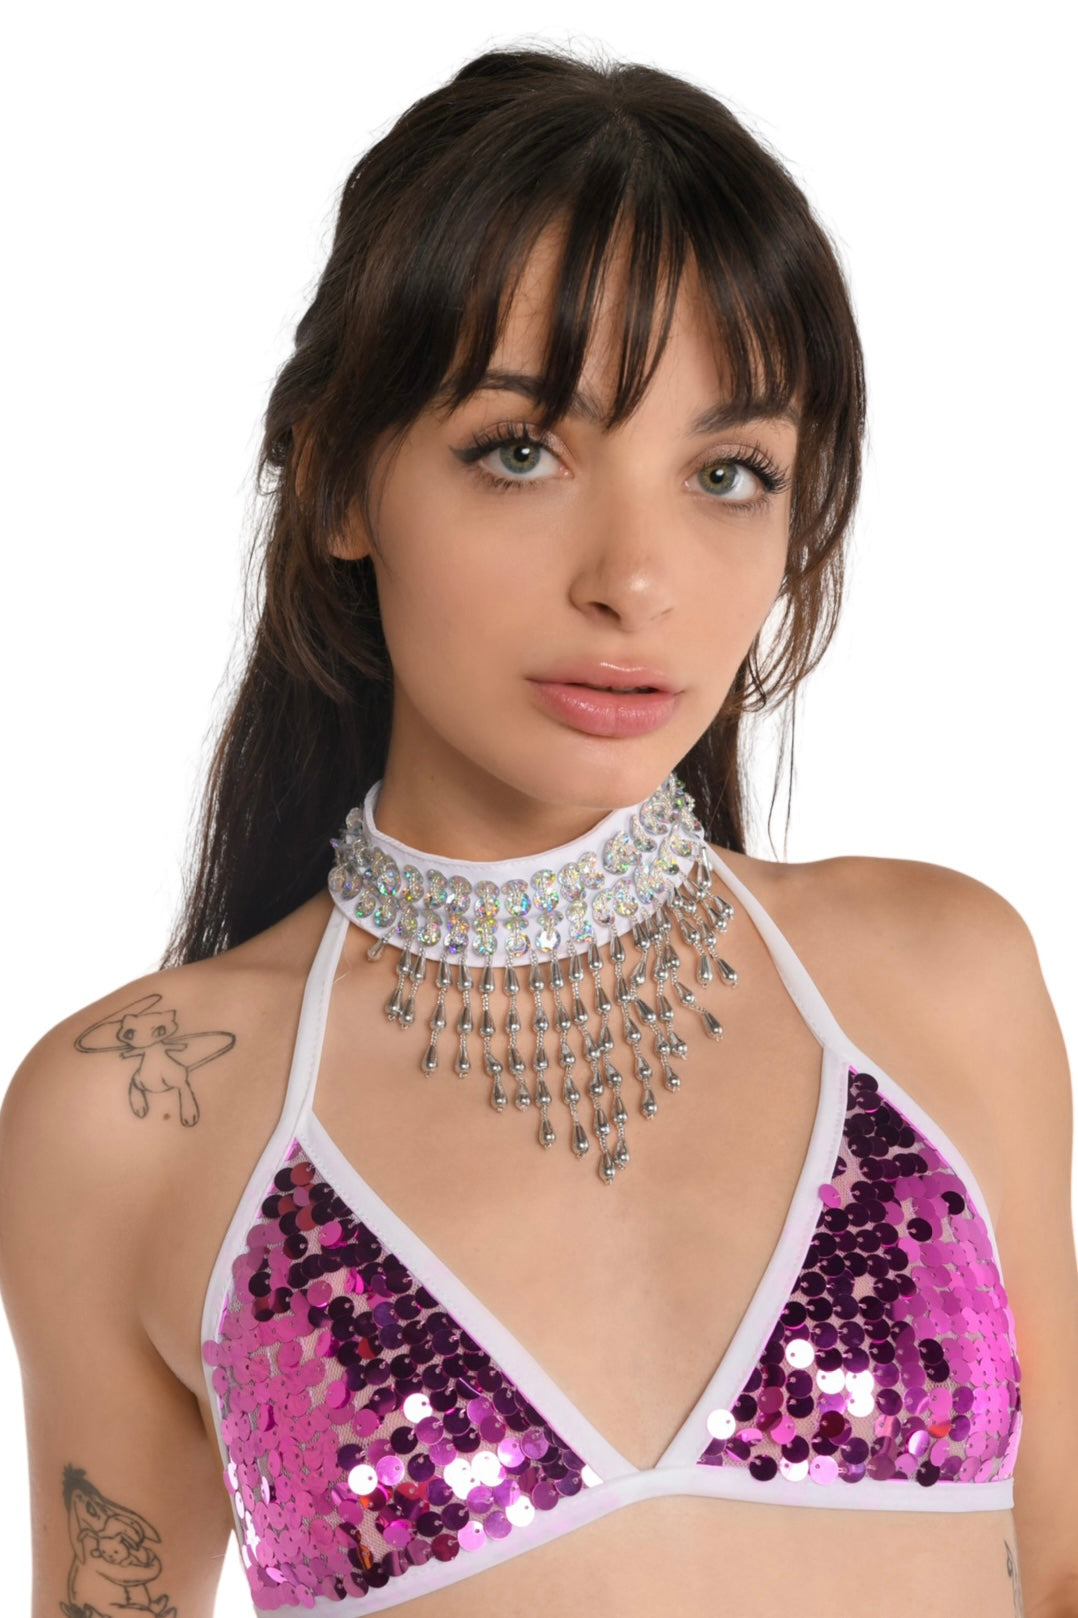 Hand Stitched Sequin Choker/Necklace - Moonlight